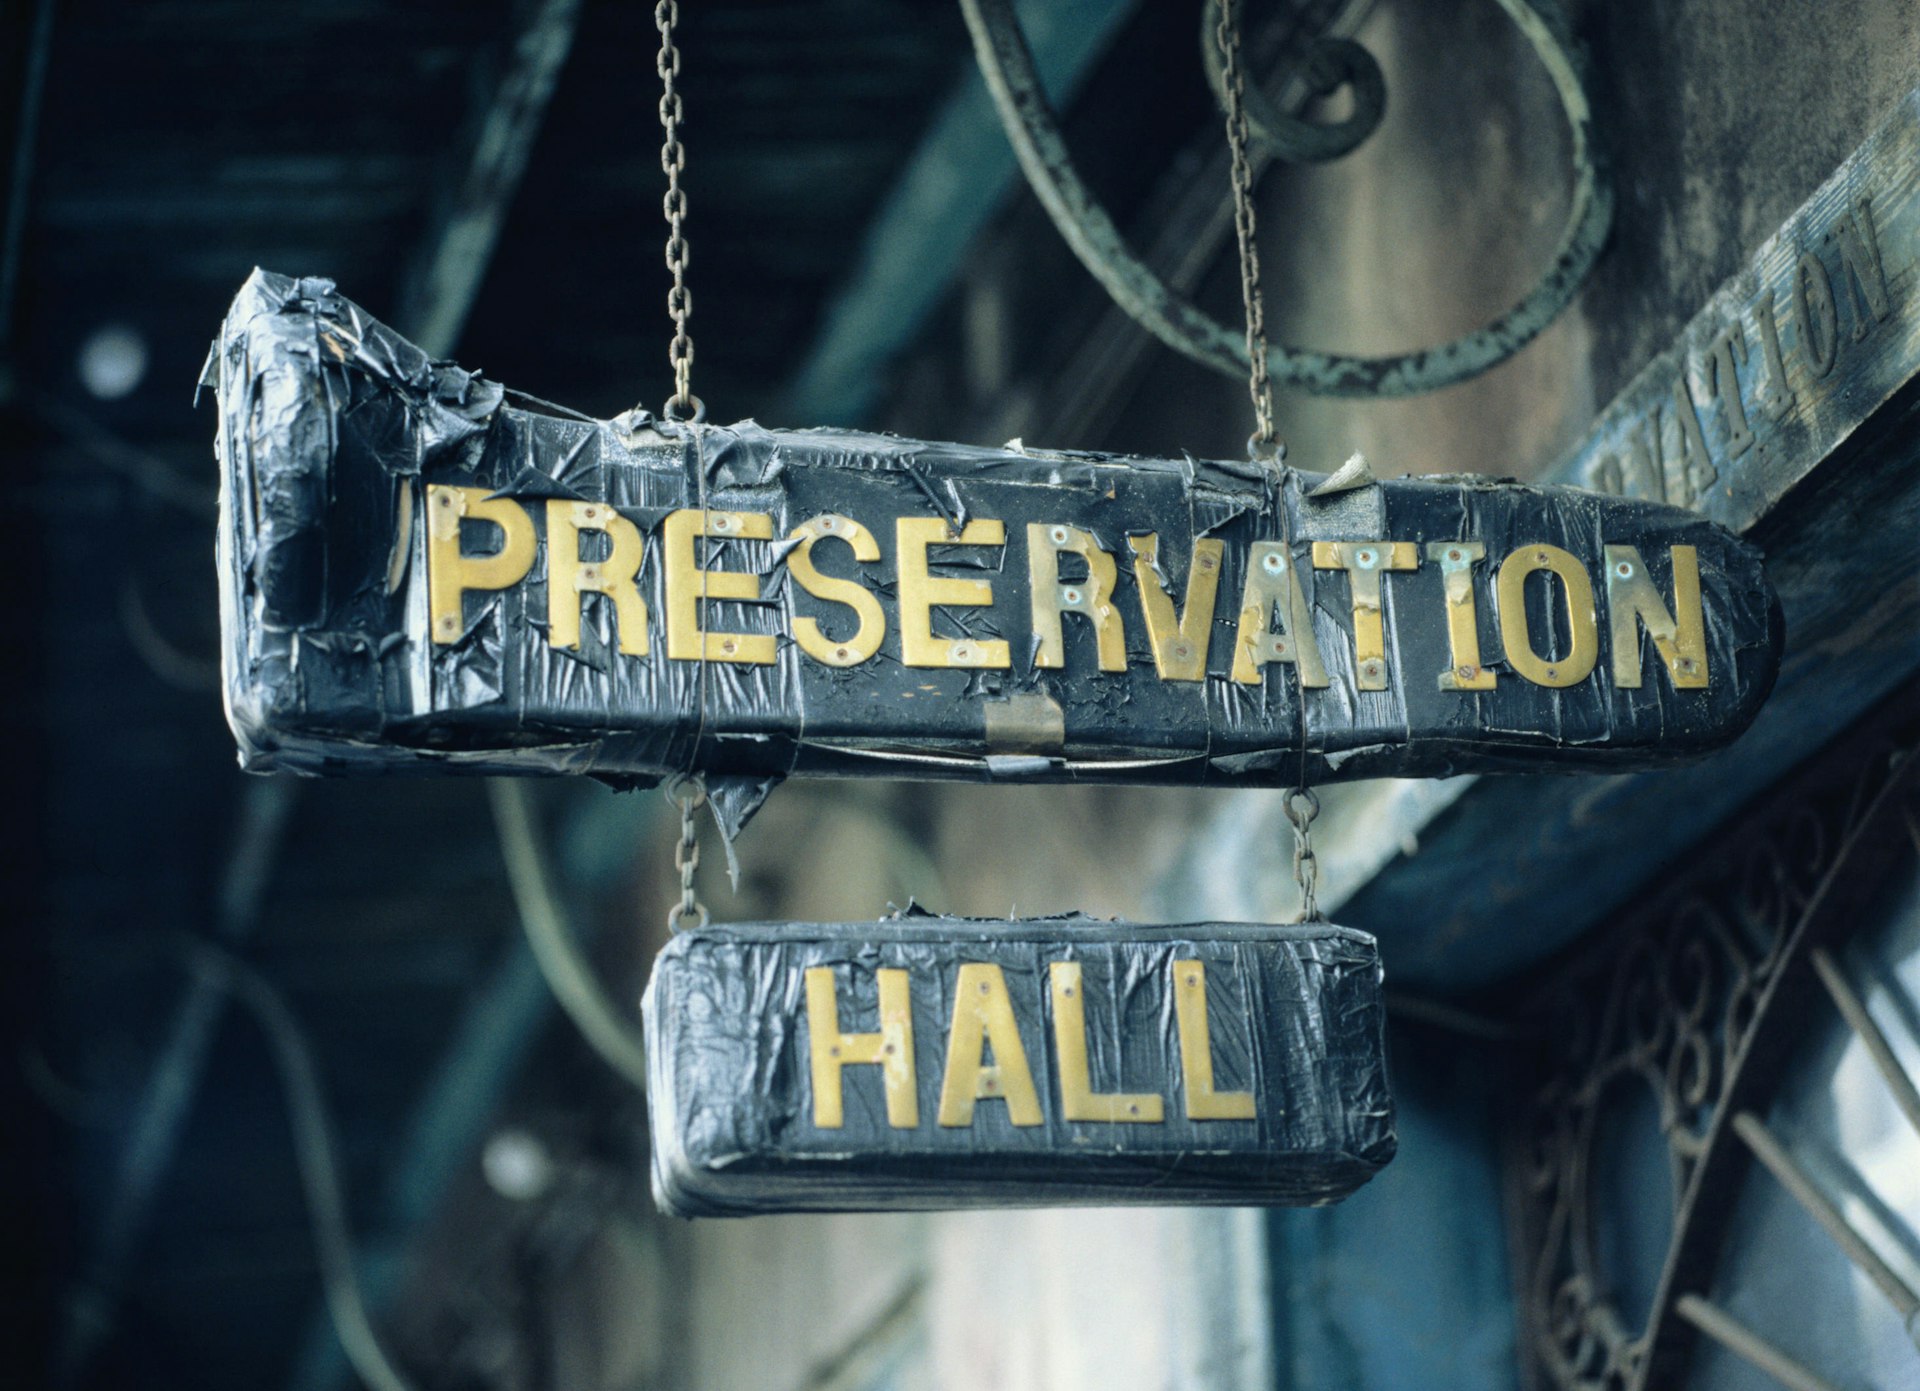 Features - Preservation Hall, a Jazz venue - New Orleans, Louisiana